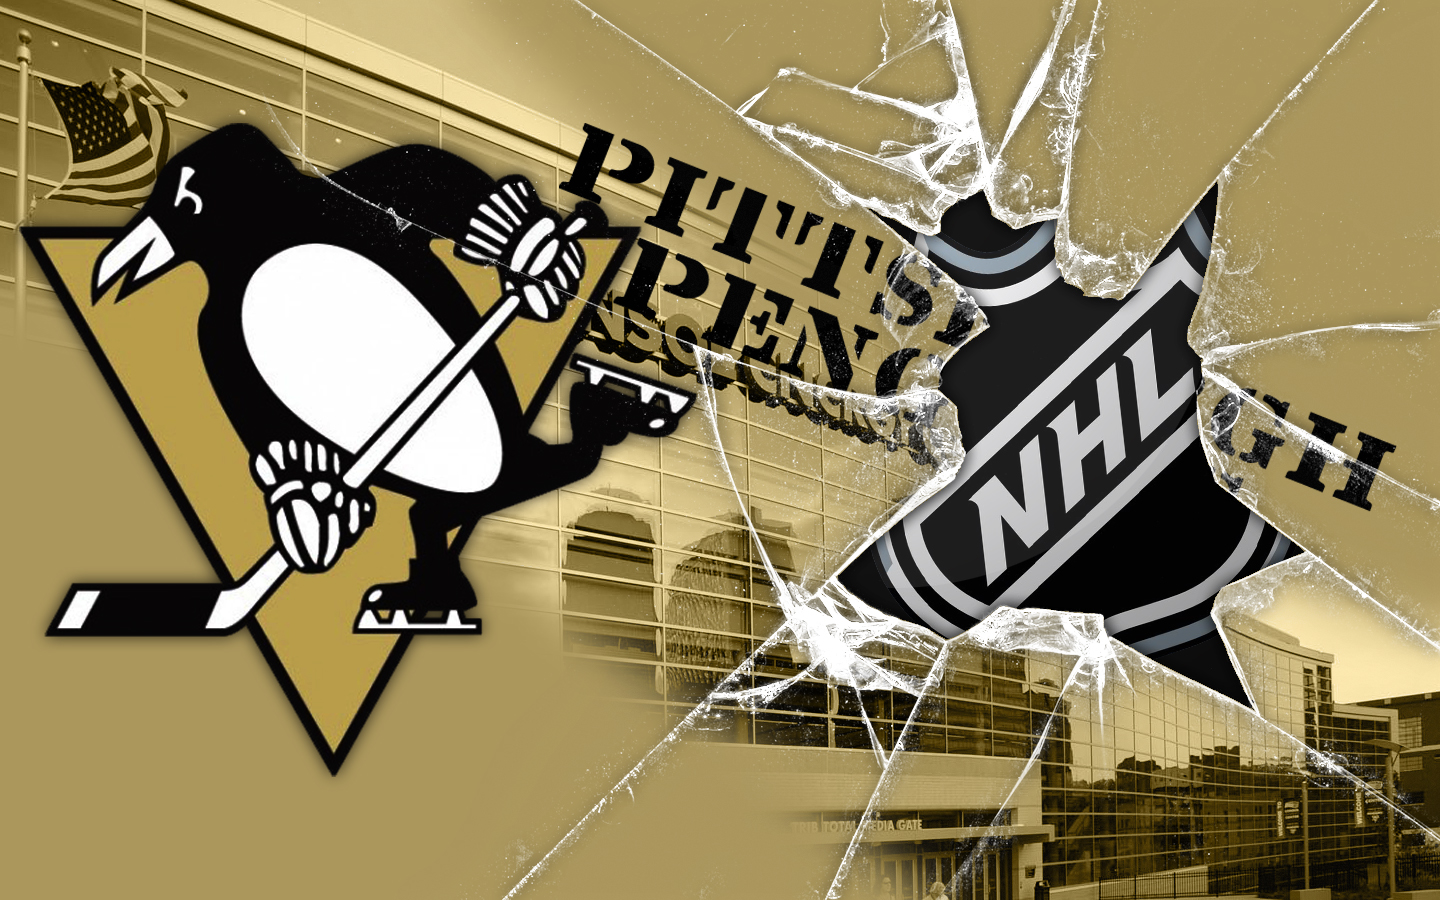 Penguins Background Puters Pittsburgh Wallpaper